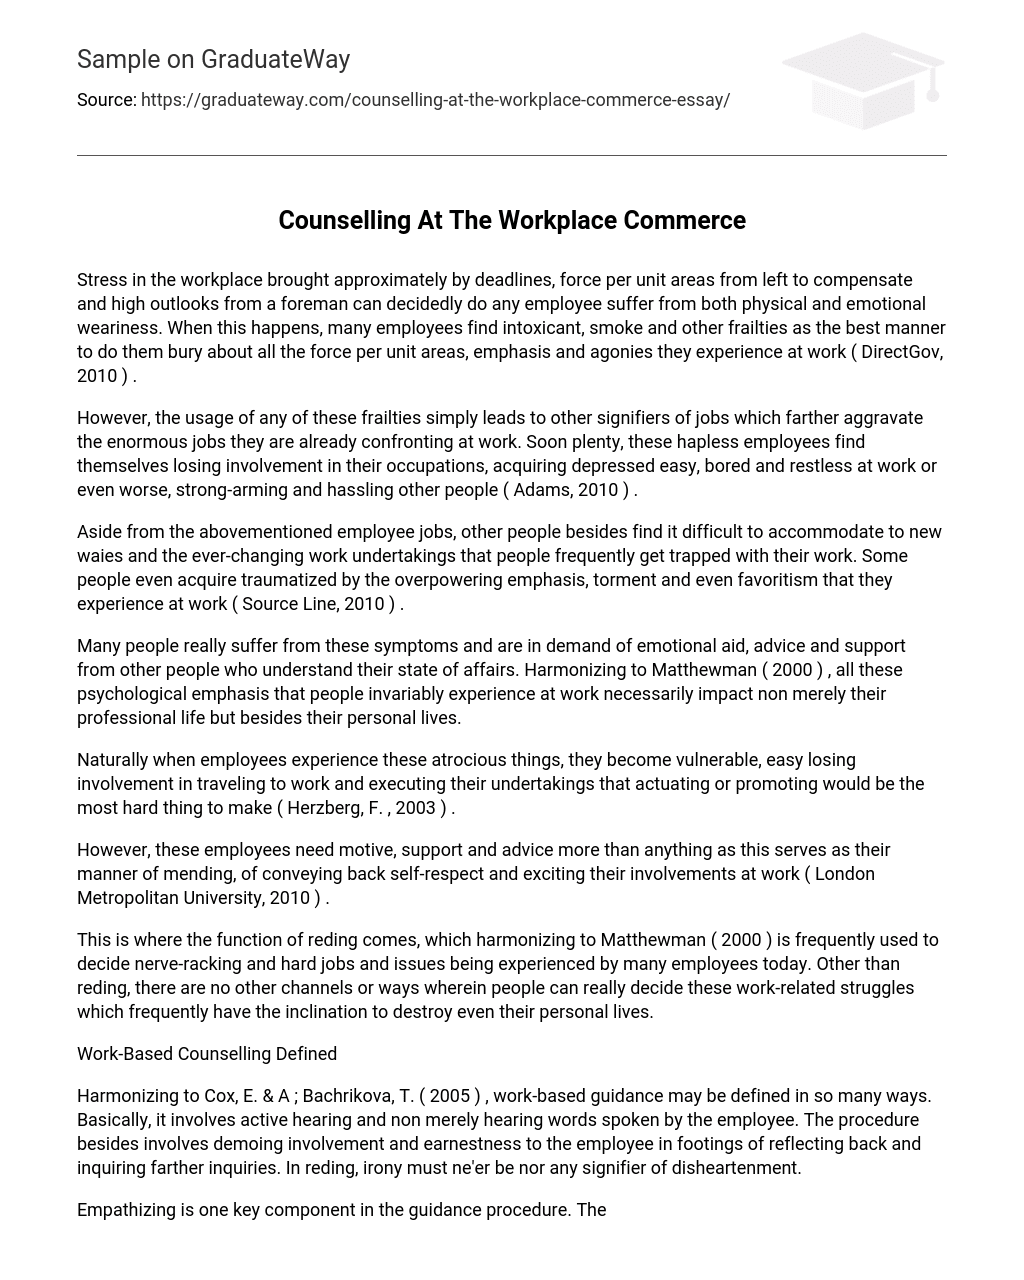 Counselling At The Workplace Commerce